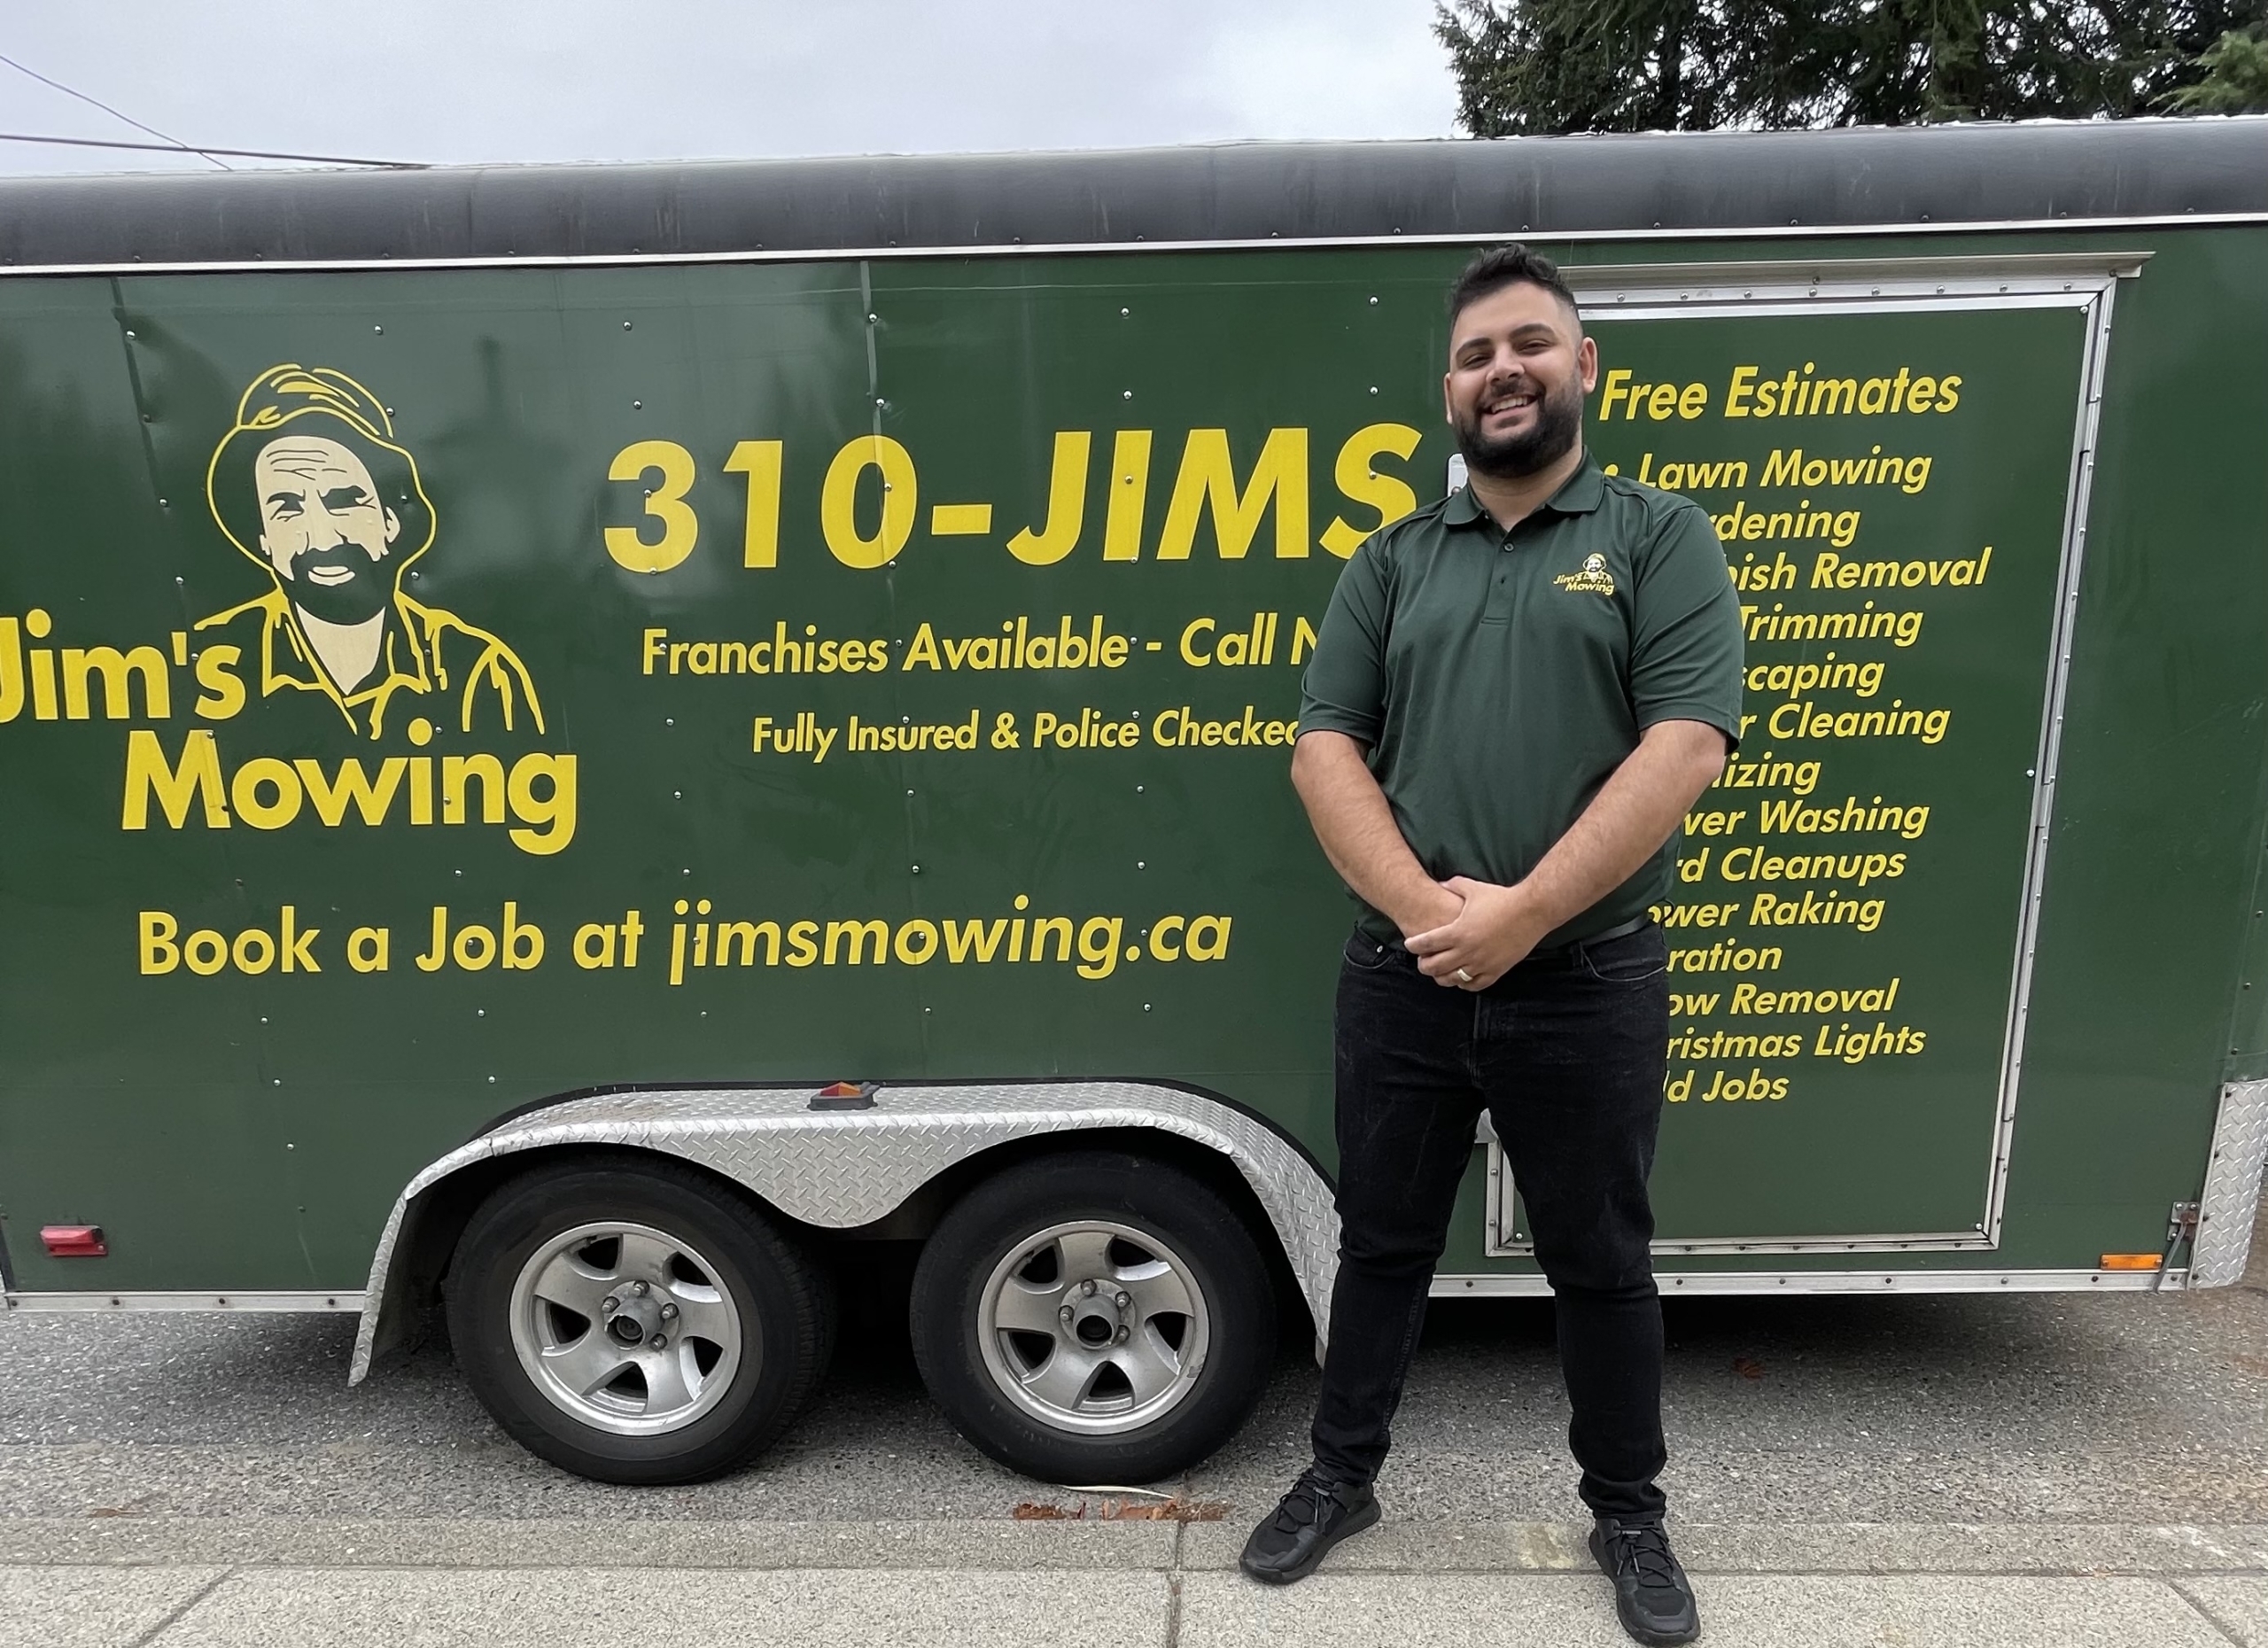 Jim’s Mowing Landscaping Franchise in B.C